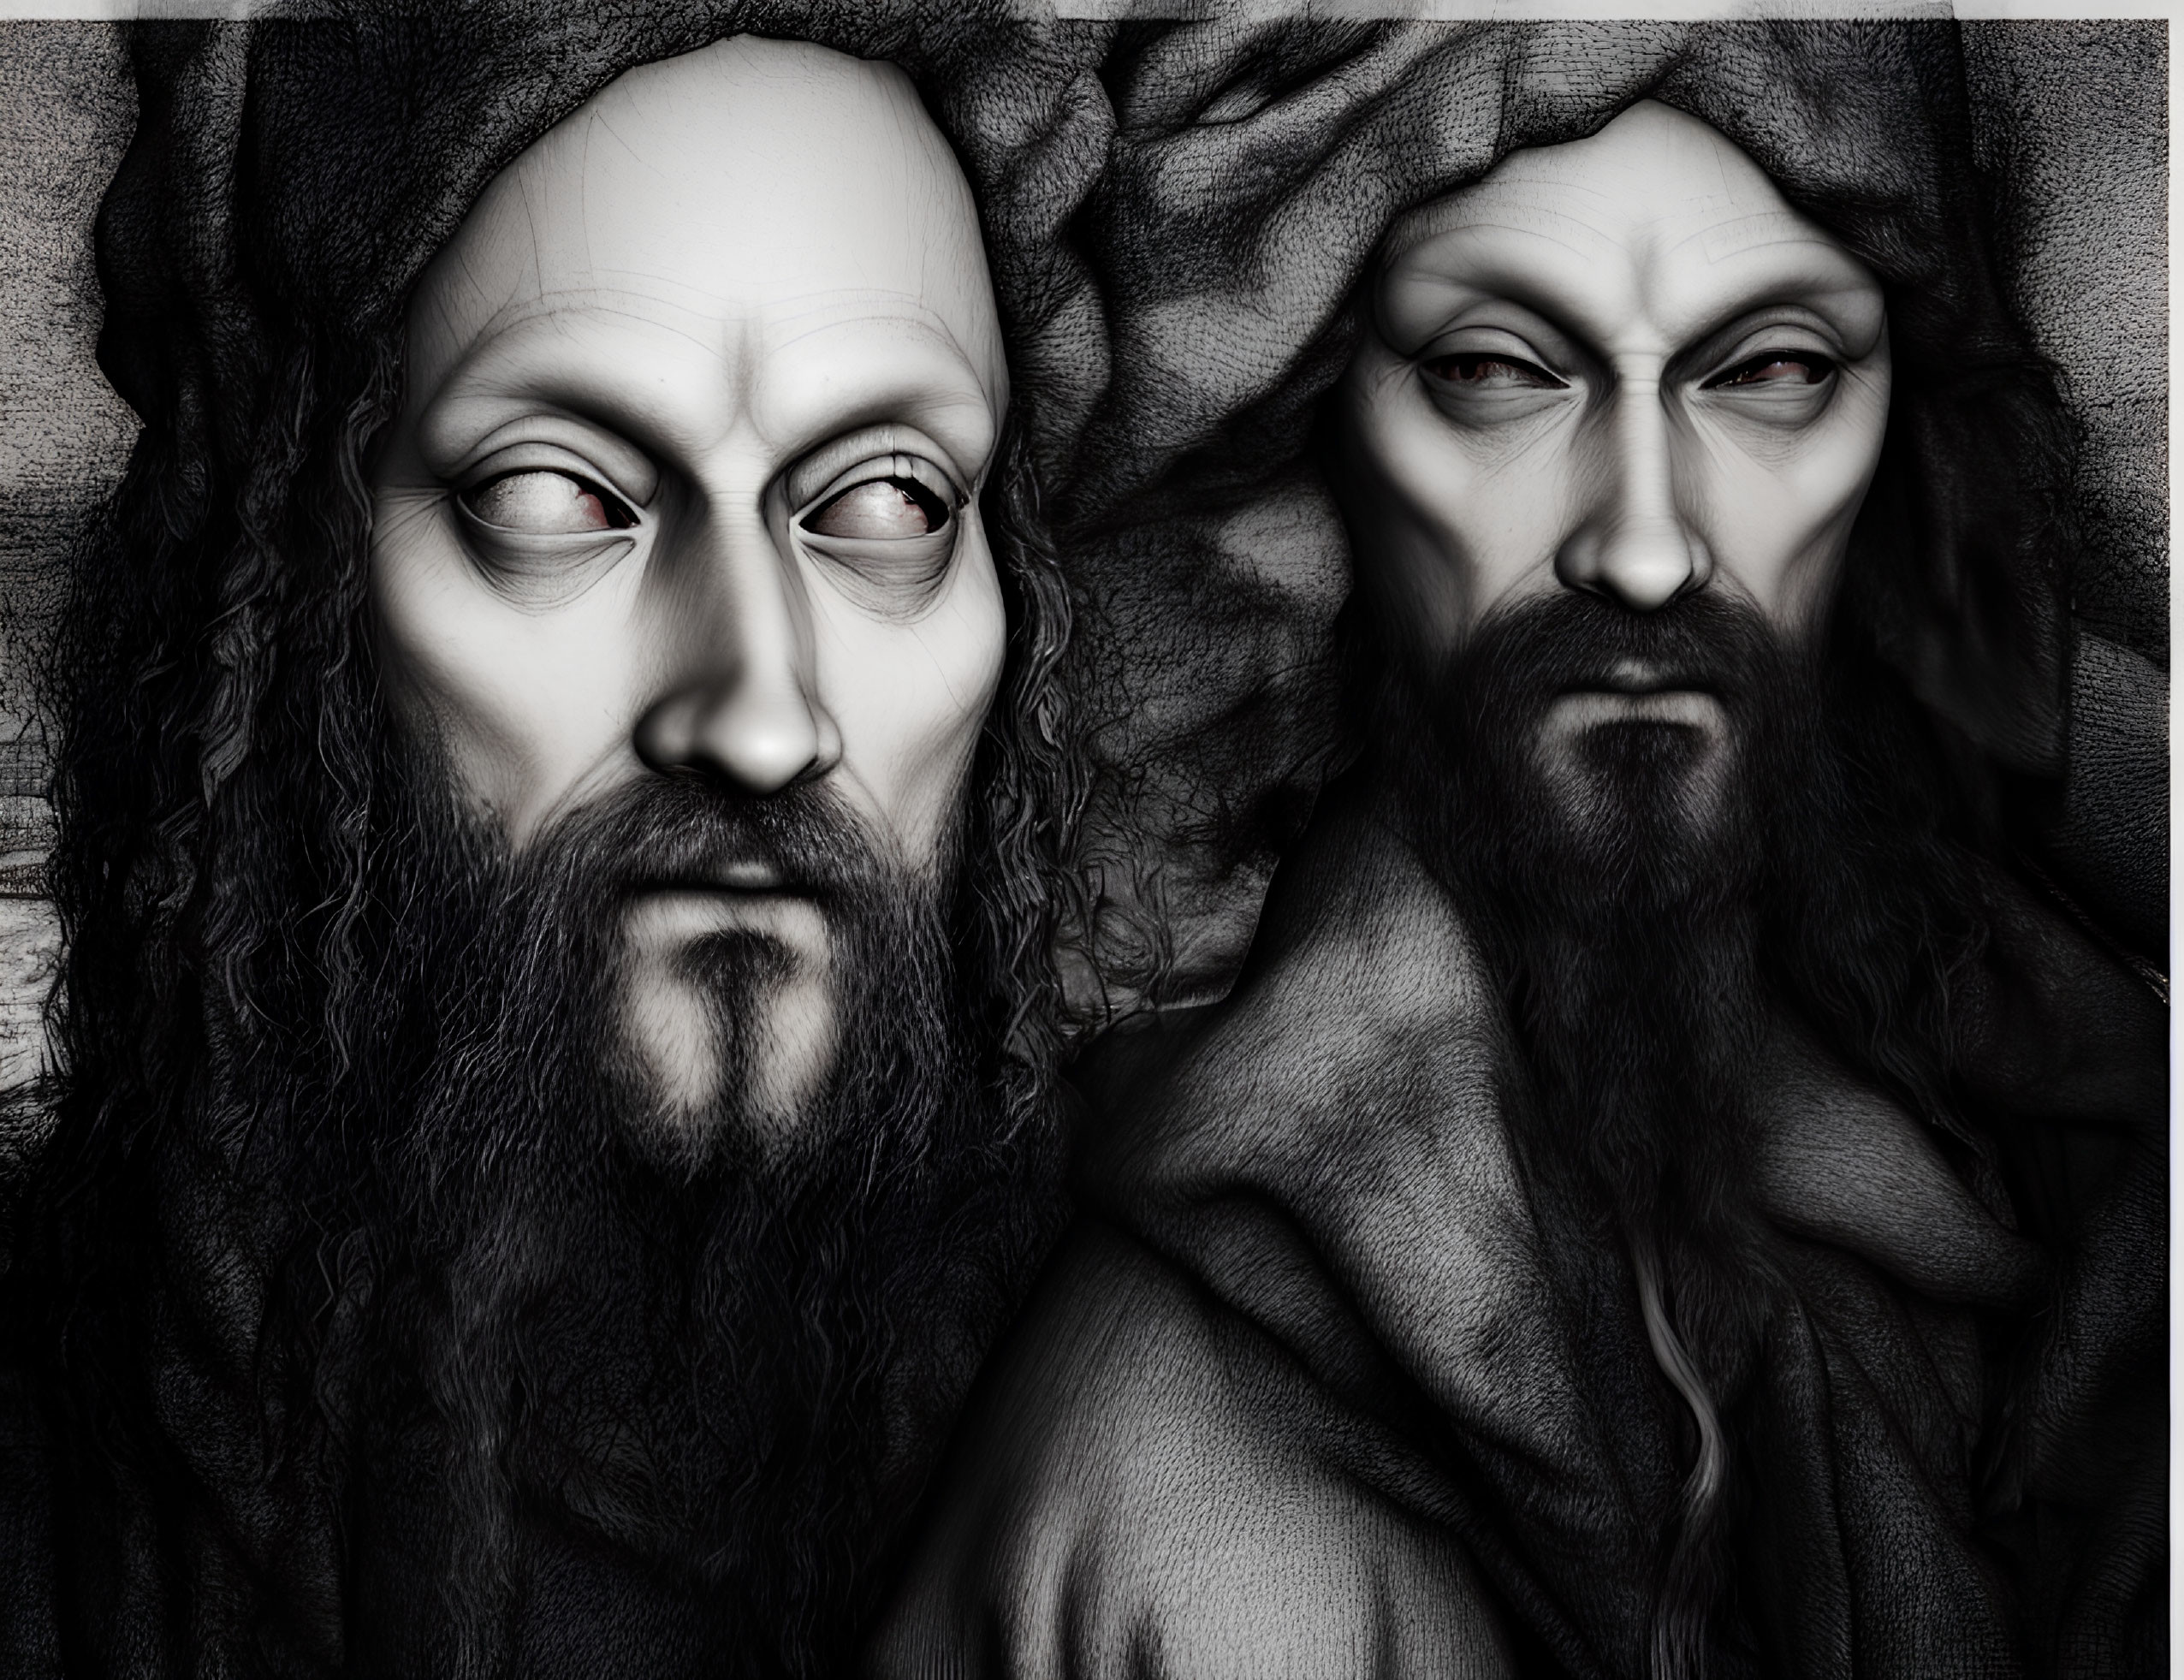 Monochrome artistic depiction of two male figures with intense gazes and draped headwear